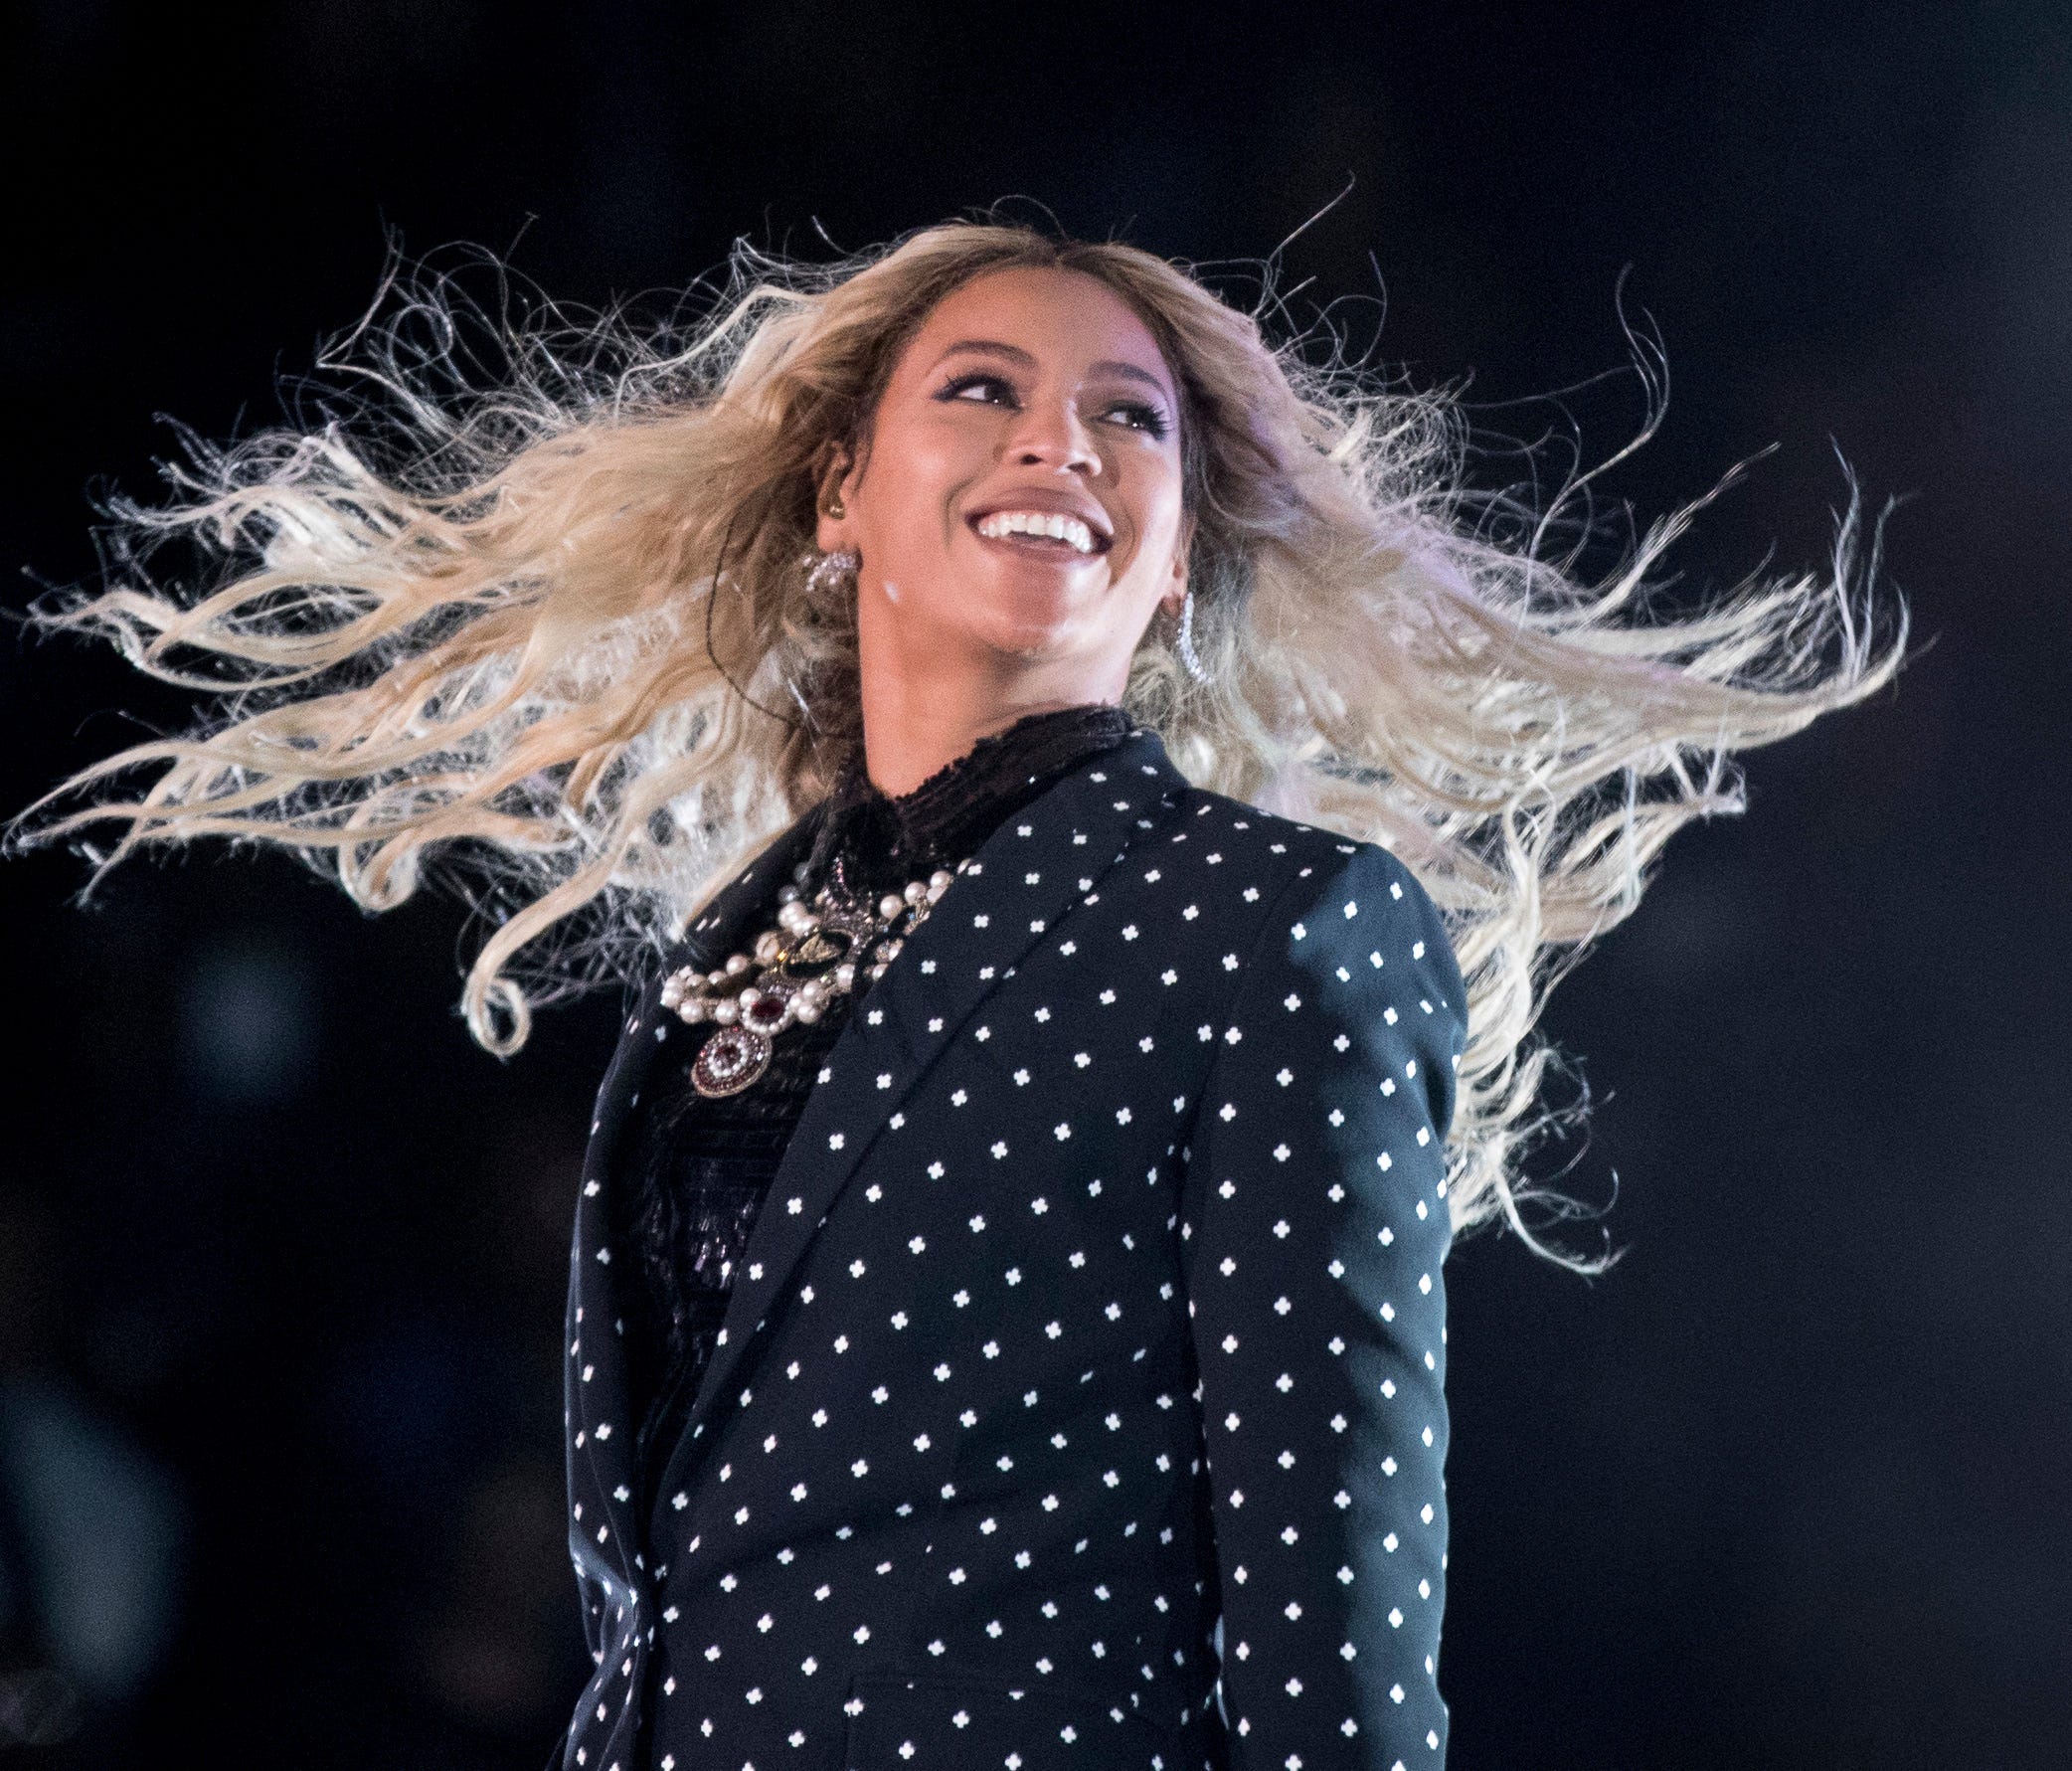 Beyonce, shown here in 2016, surprised Colin Kaepernick and guests when she walked onto the stage at Barclays Center during the Sports Illustrated Sportsperson of the Year awards.